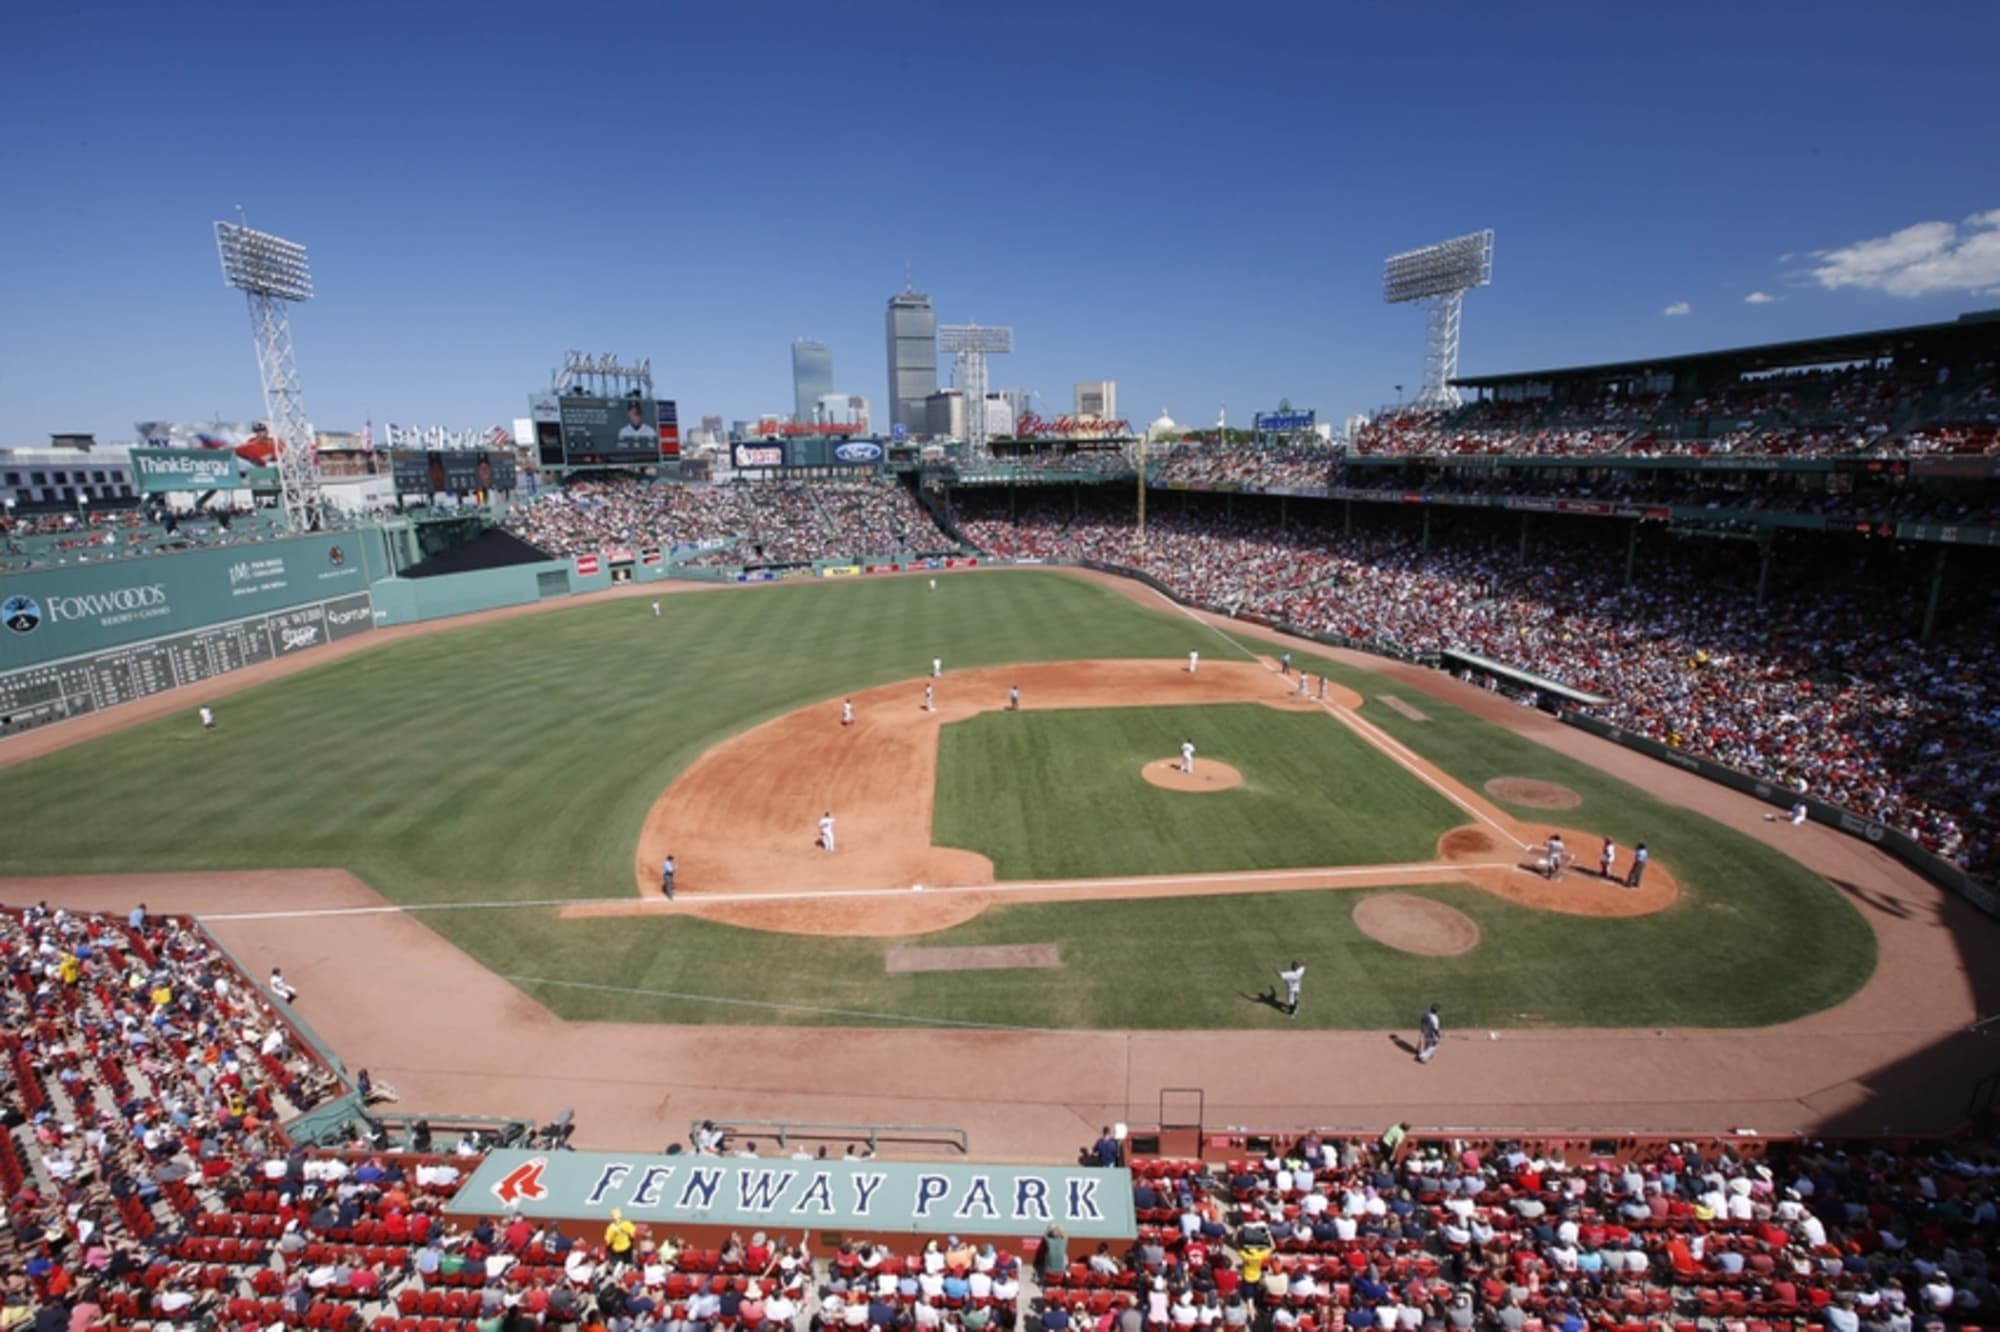 Red Sox promotions, giveaways at Fenway Park during 2017 season